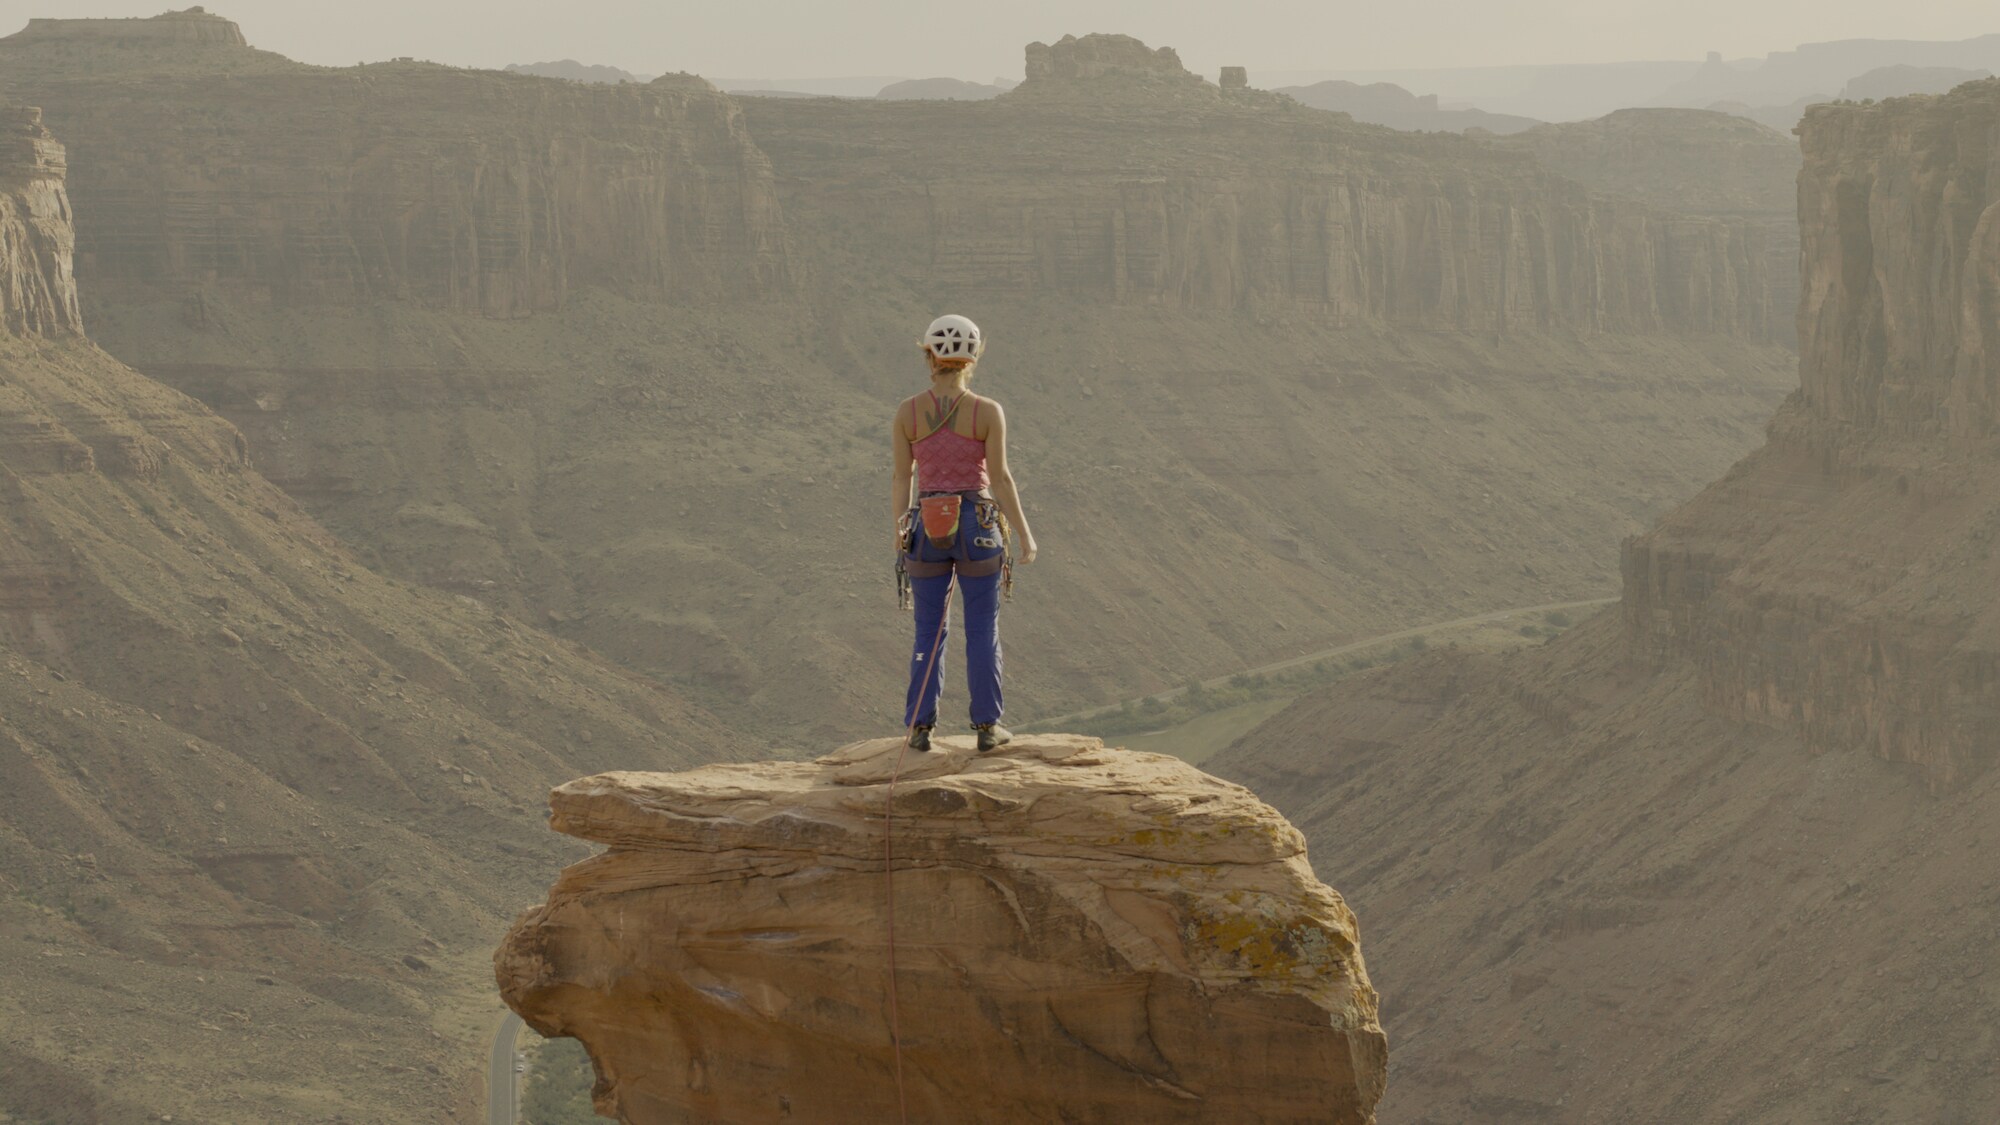 Faith Dickey looks out to the scenery after walking across on a slackline.  (National Geographic for Disney+)